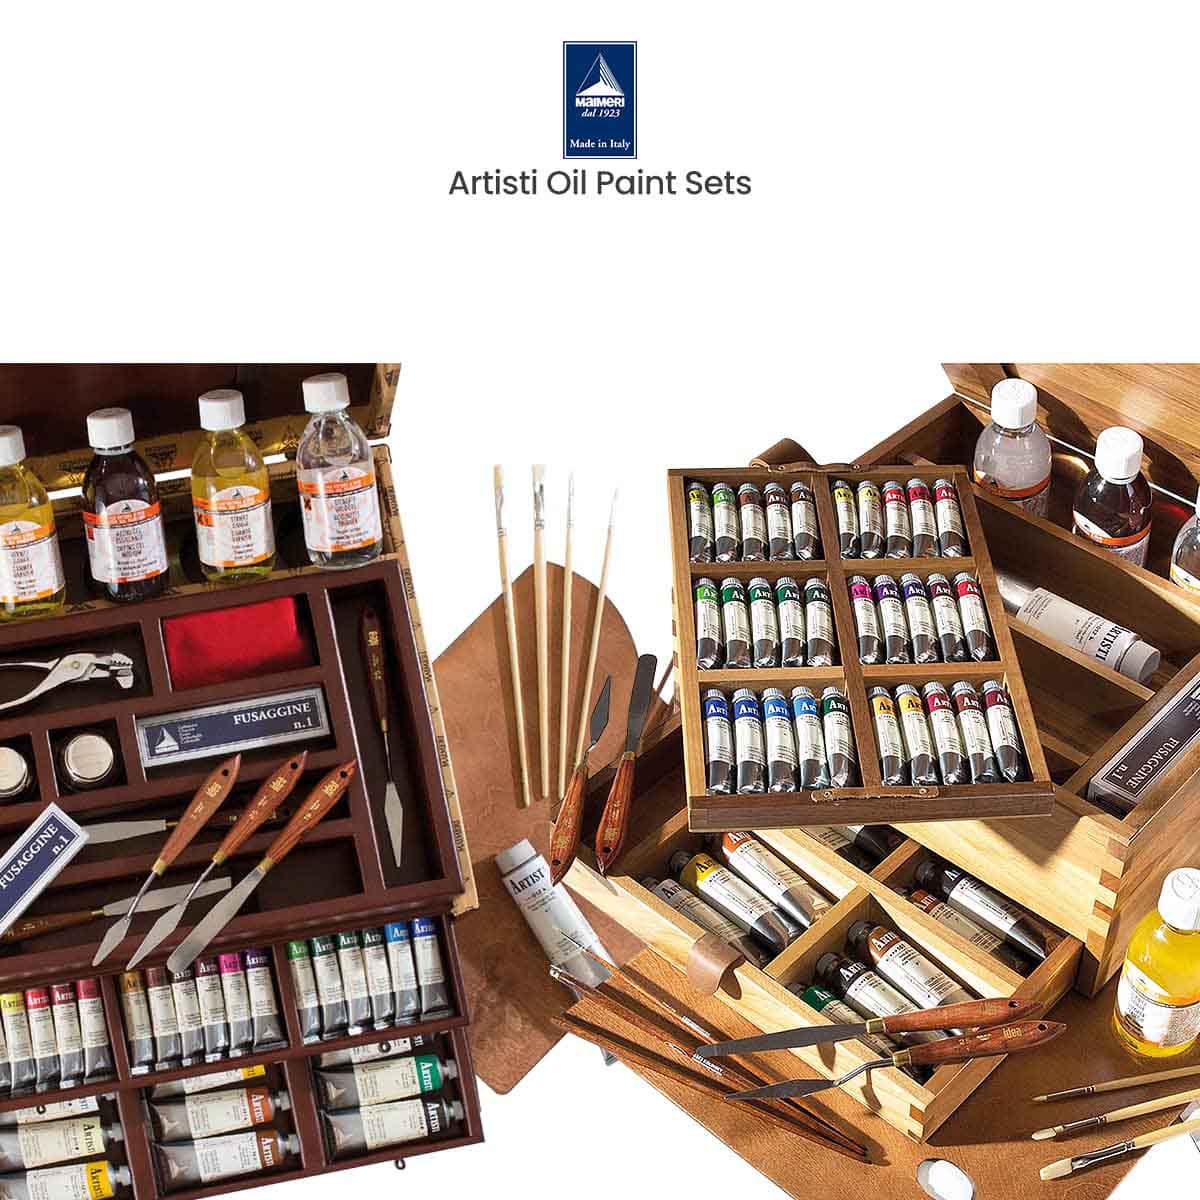 U.S. Art Supply 21-Piece Artist Oil Painting Set with Wooden H-Frame Studio  Easel, 12 Vivid Oil Paint Colors, Stretched Canvas, 6 Brushes, Wood Painting  Palette - Kids, Students, Adults, Starter Kit 